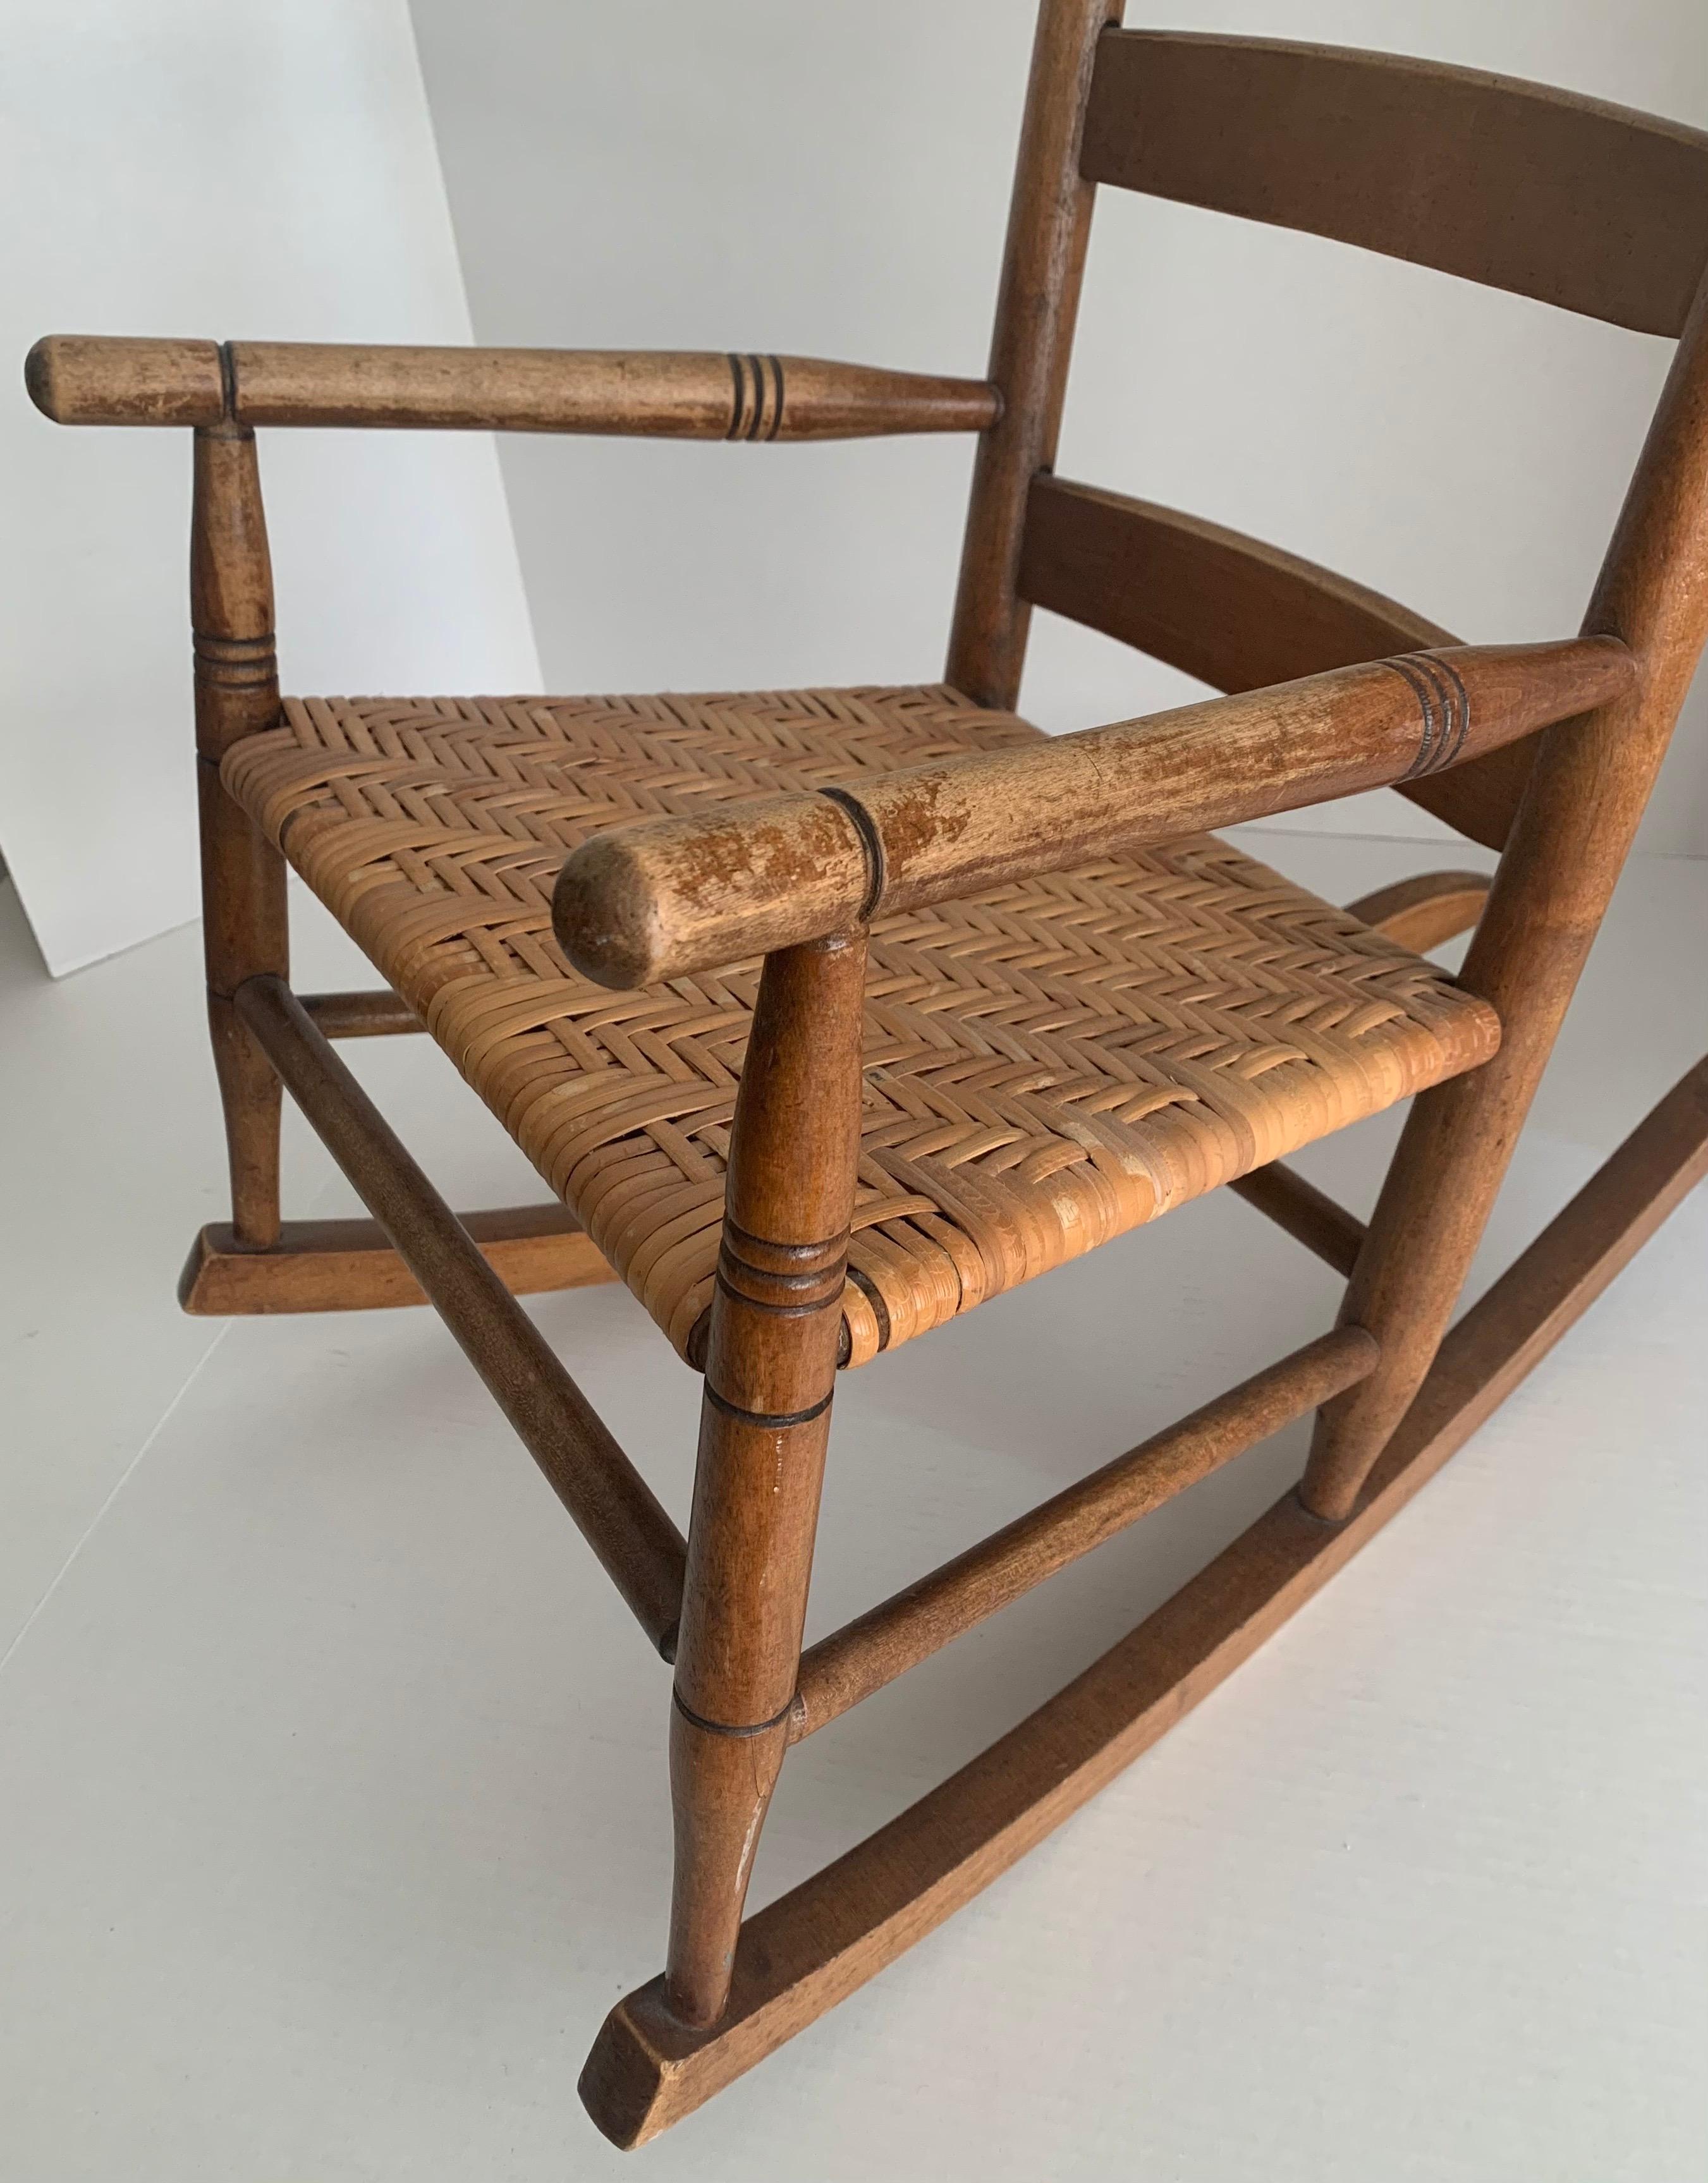 1950s Rustic Style Wooden Children’s Rocking Chair For Sale 5